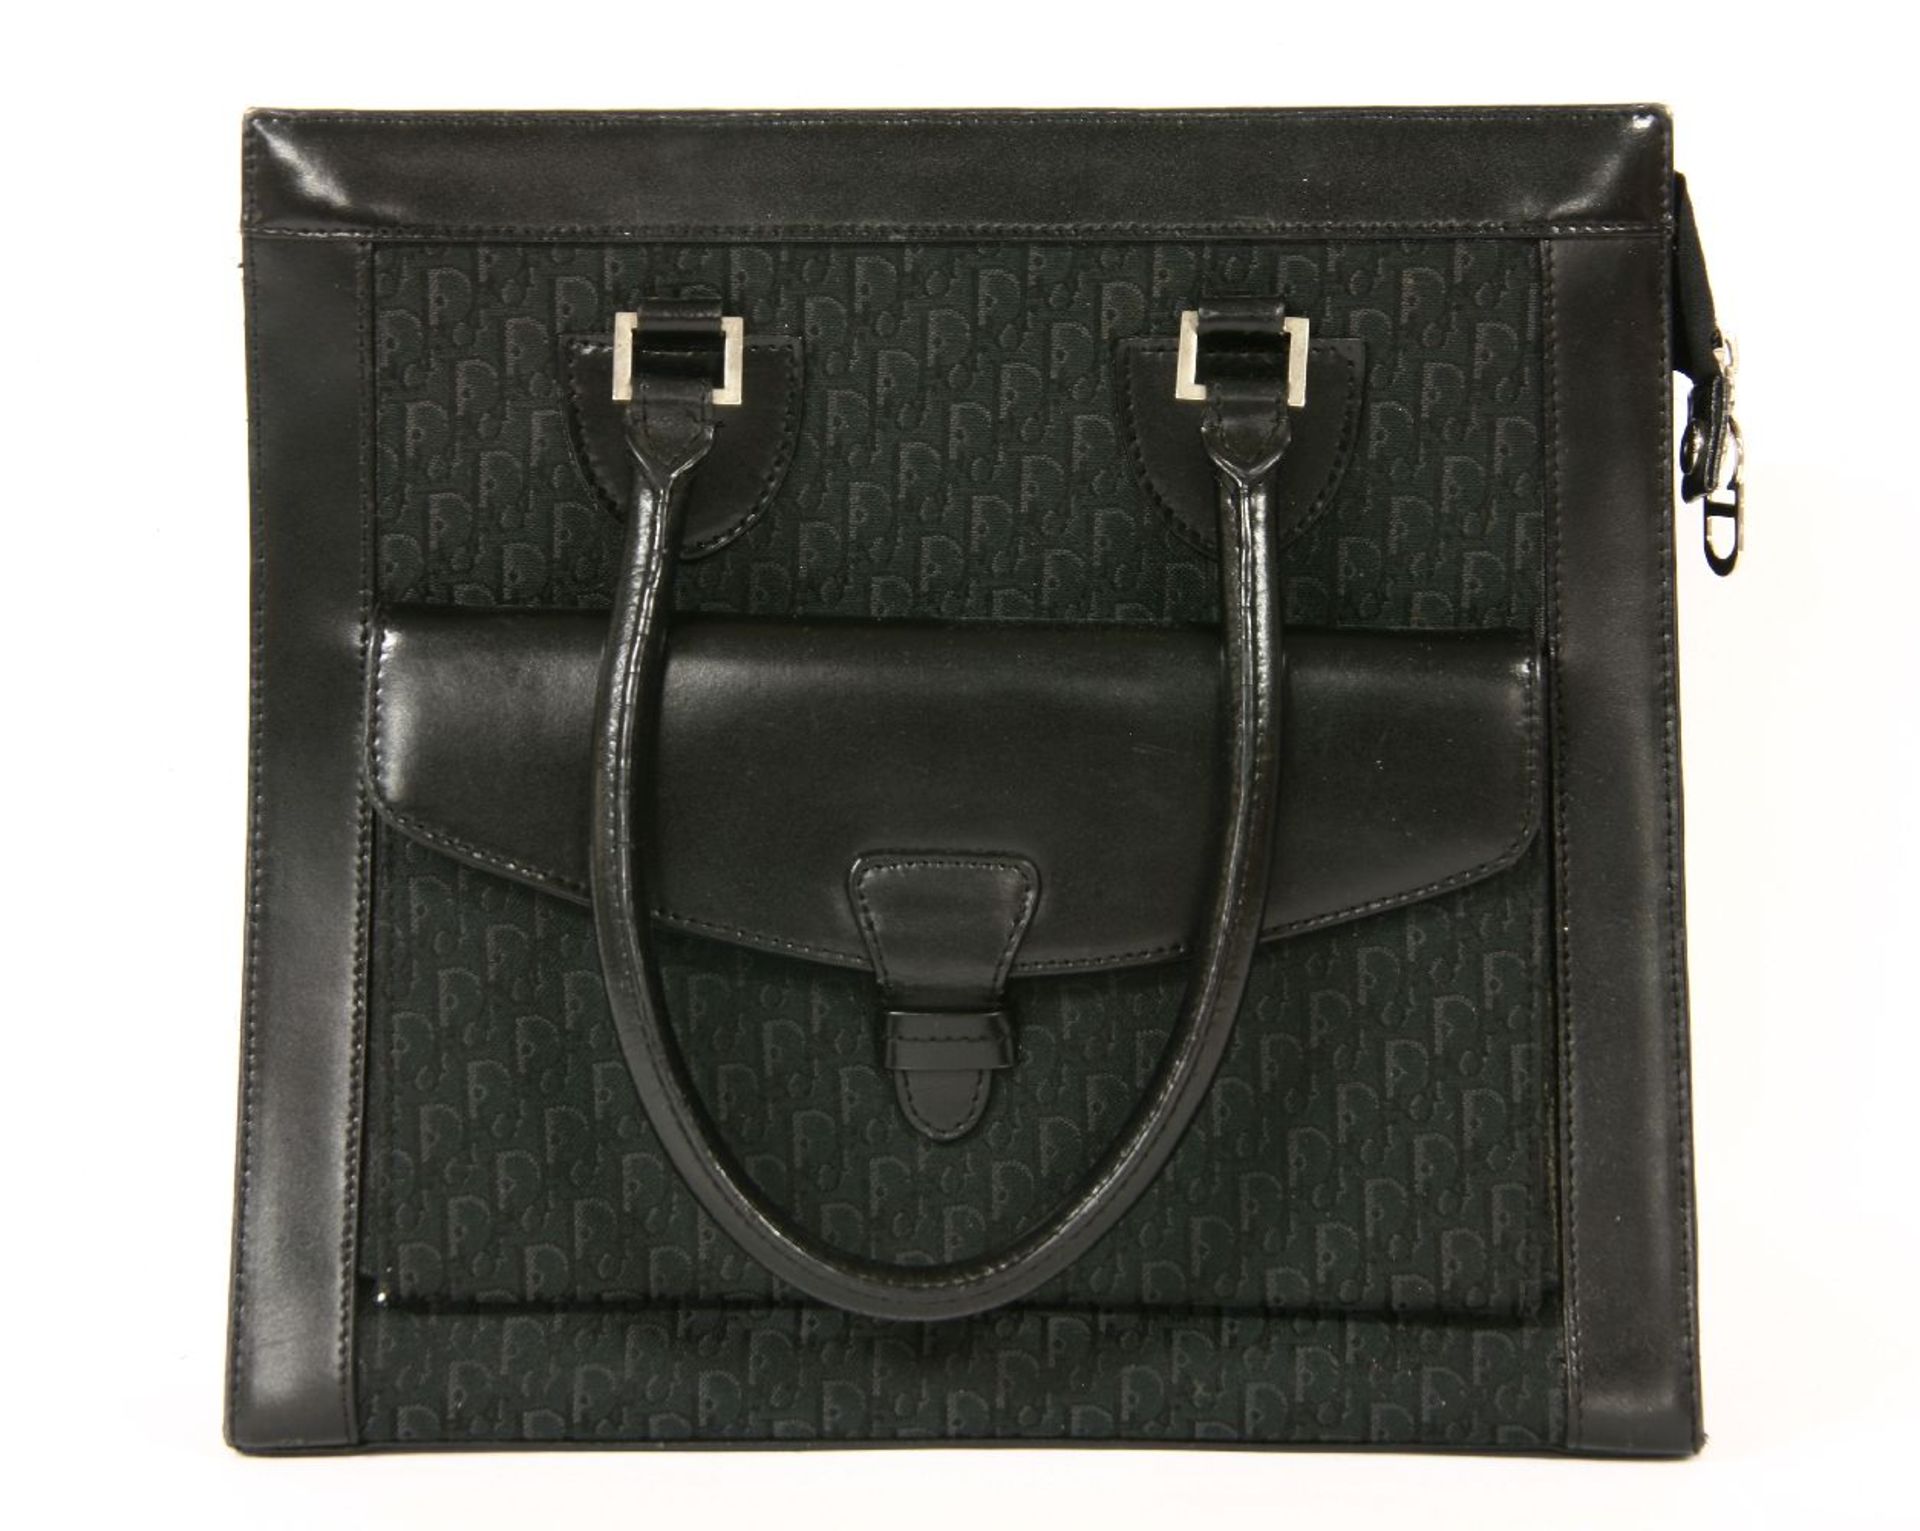 A Christian Dior shopper,monogrammed fabric and smooth black leather, with a pocket to the